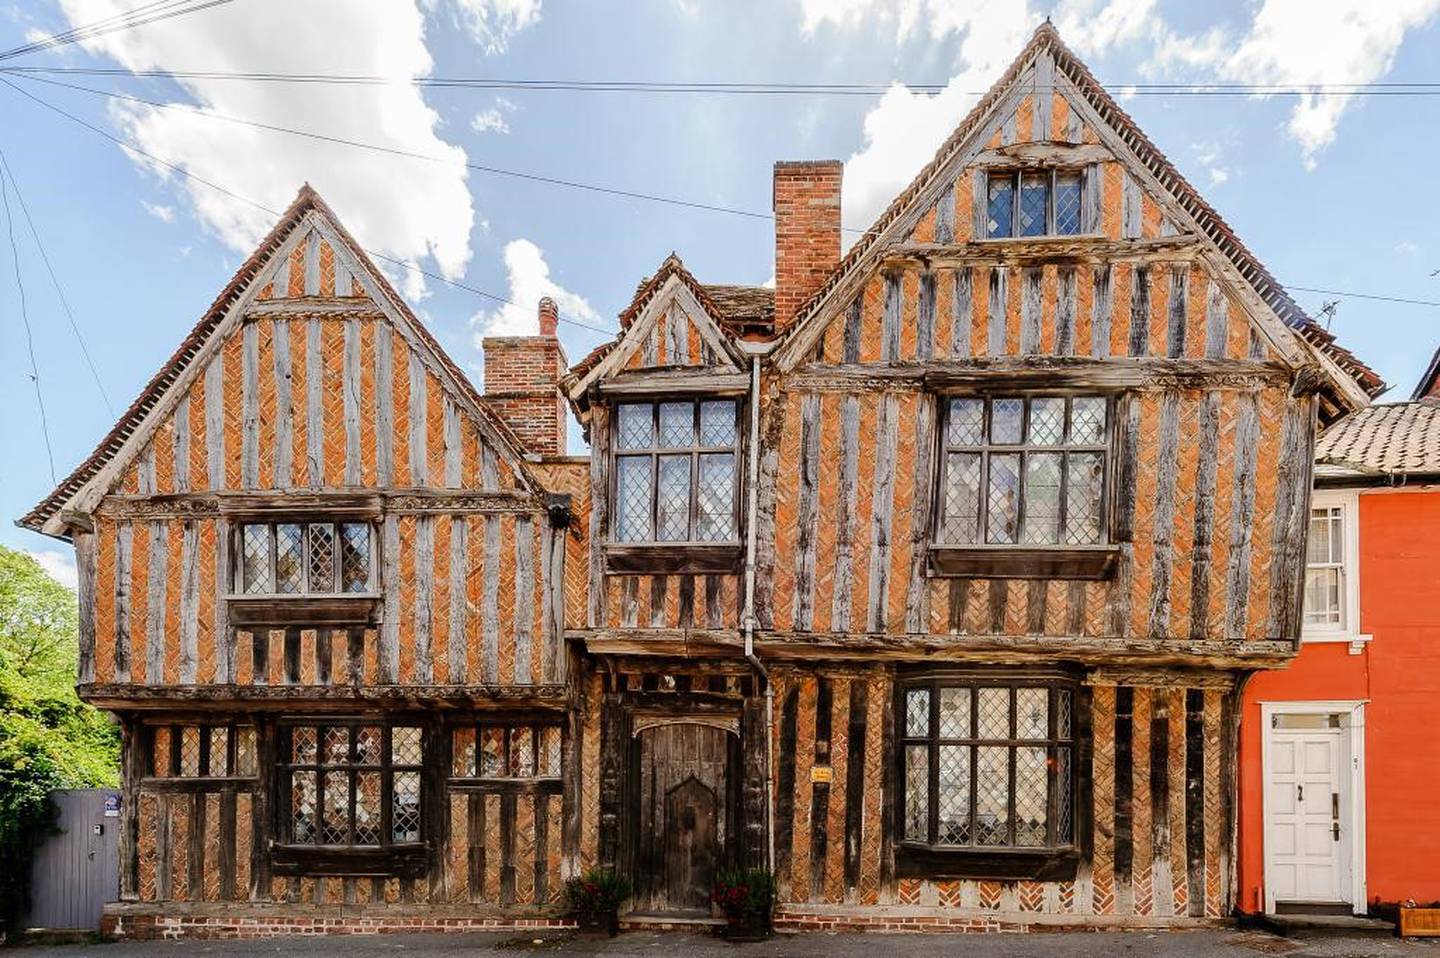 This was Harry Potter's home in Godric's Hollow in the films. Photo: Airbnb